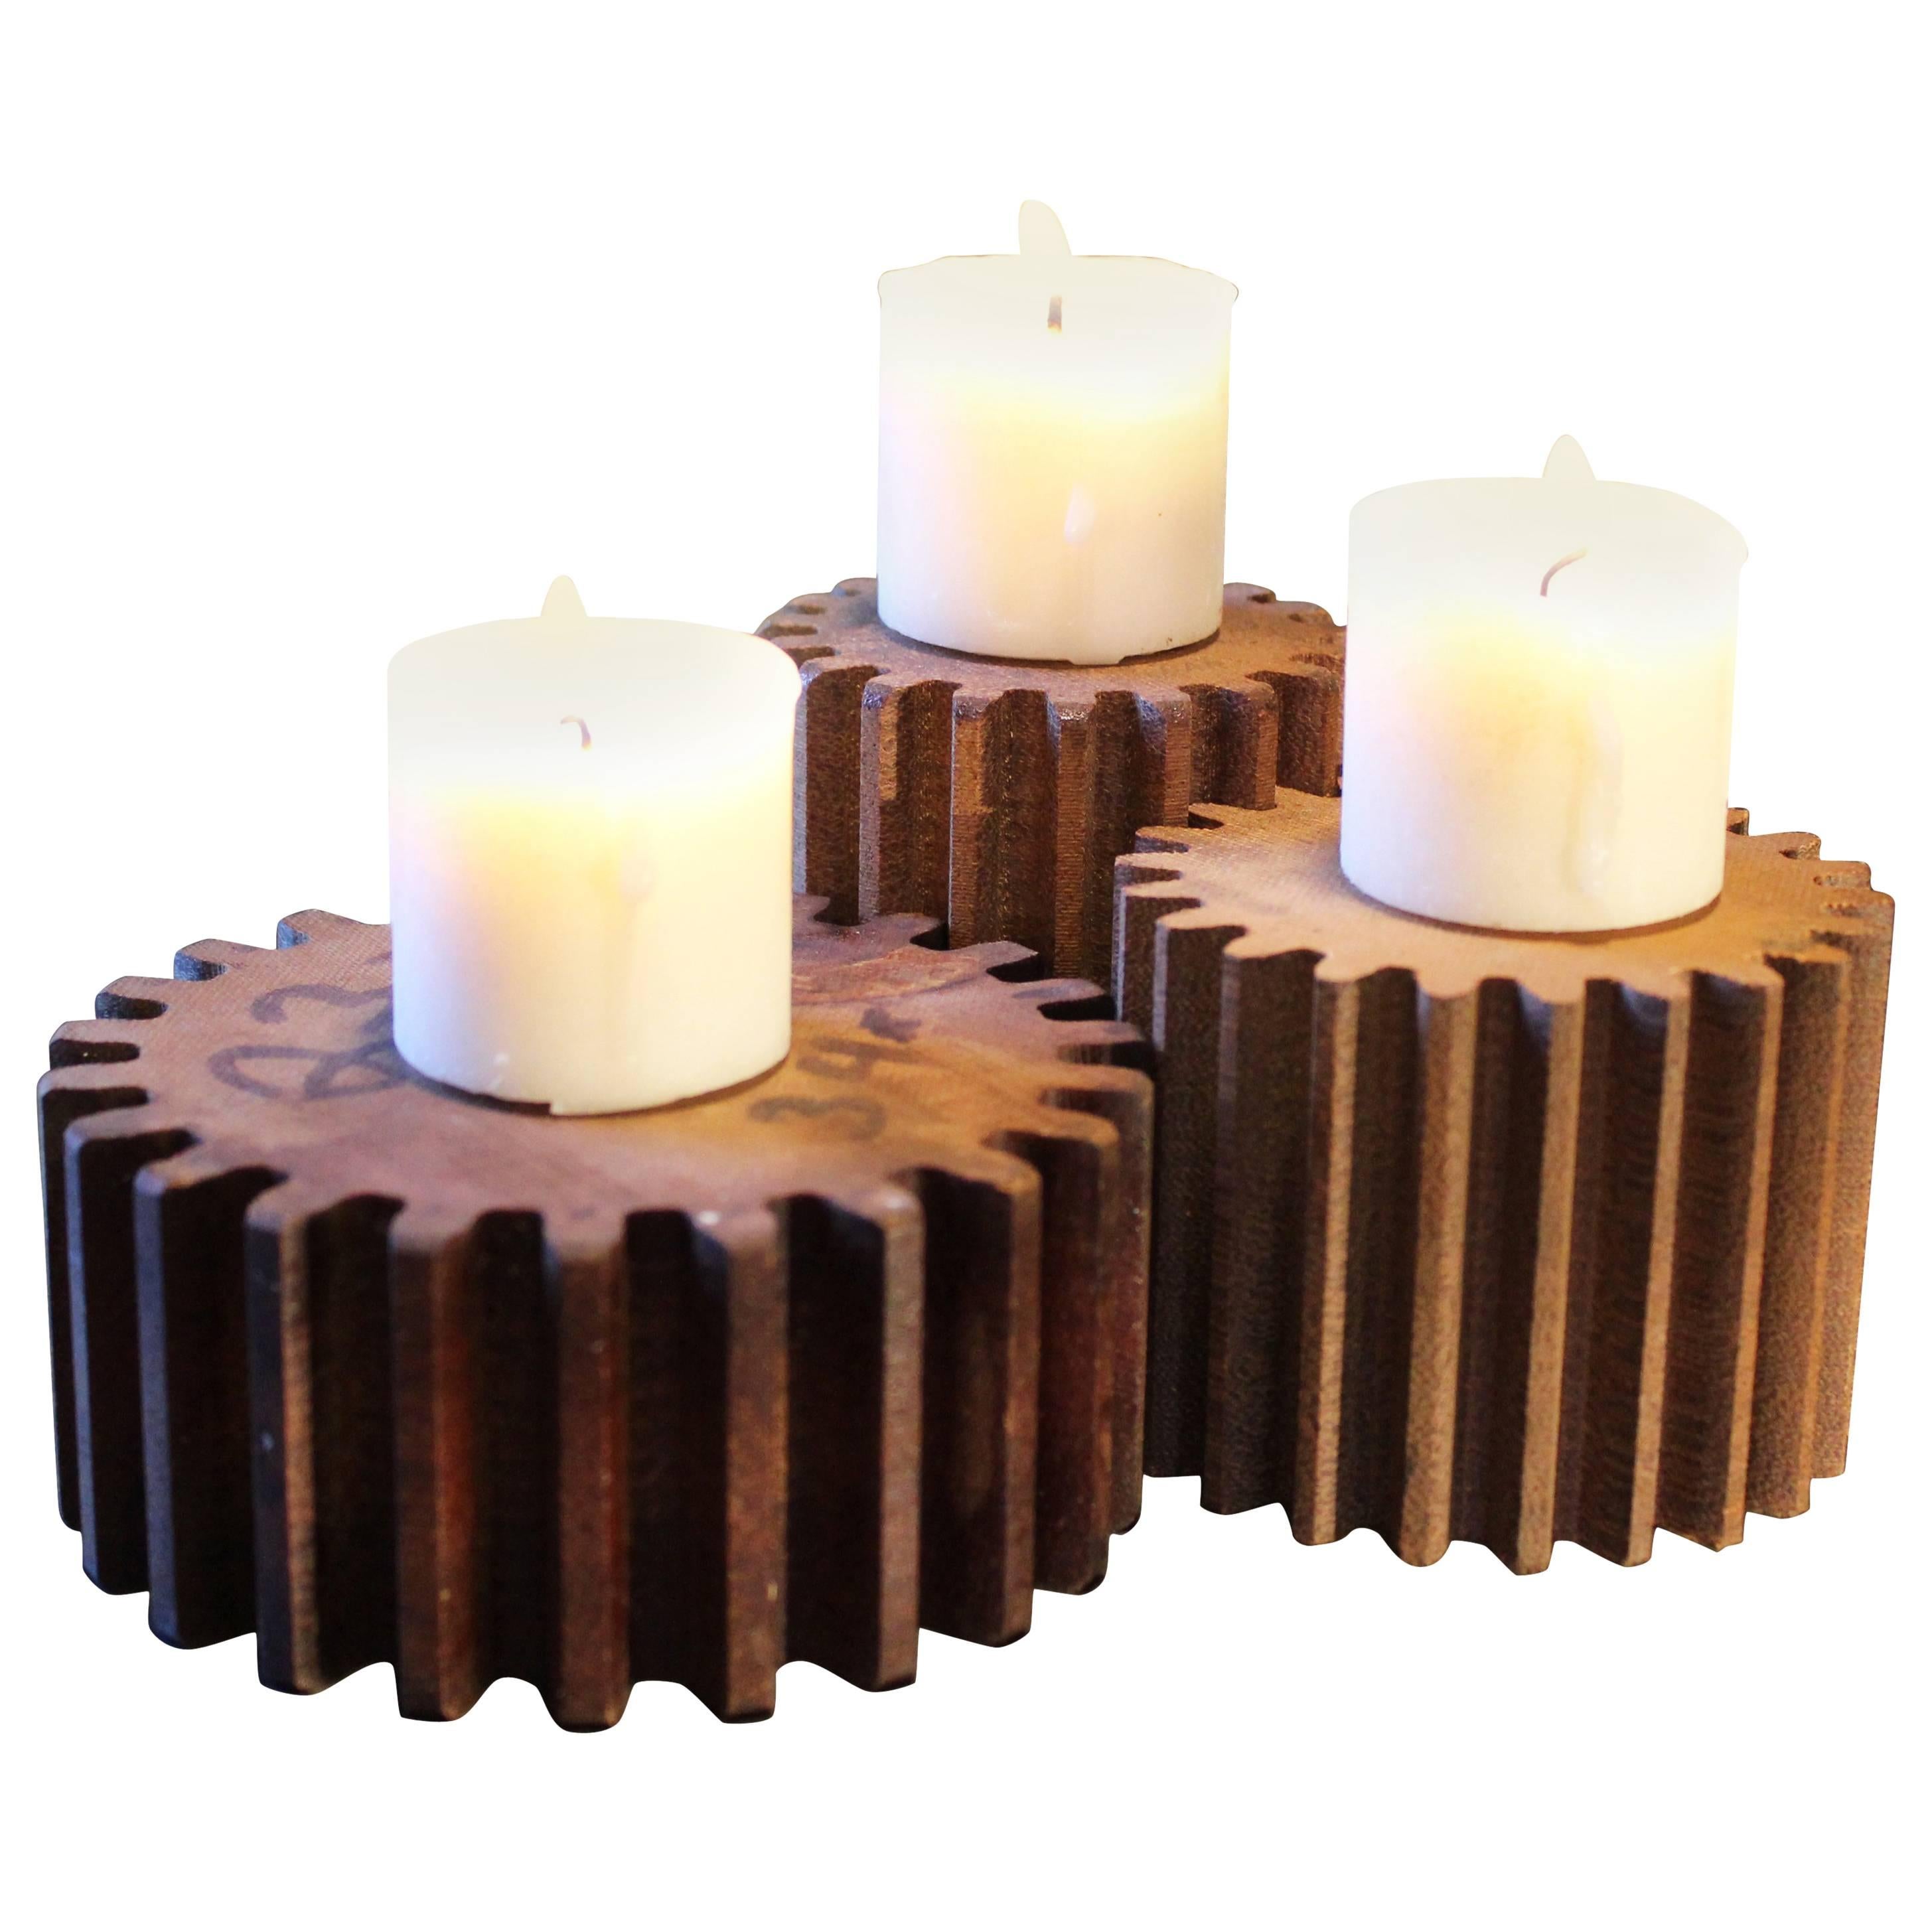 Vintage Industrial Machine Age Wooden Gear Molds Candle Stands Holders